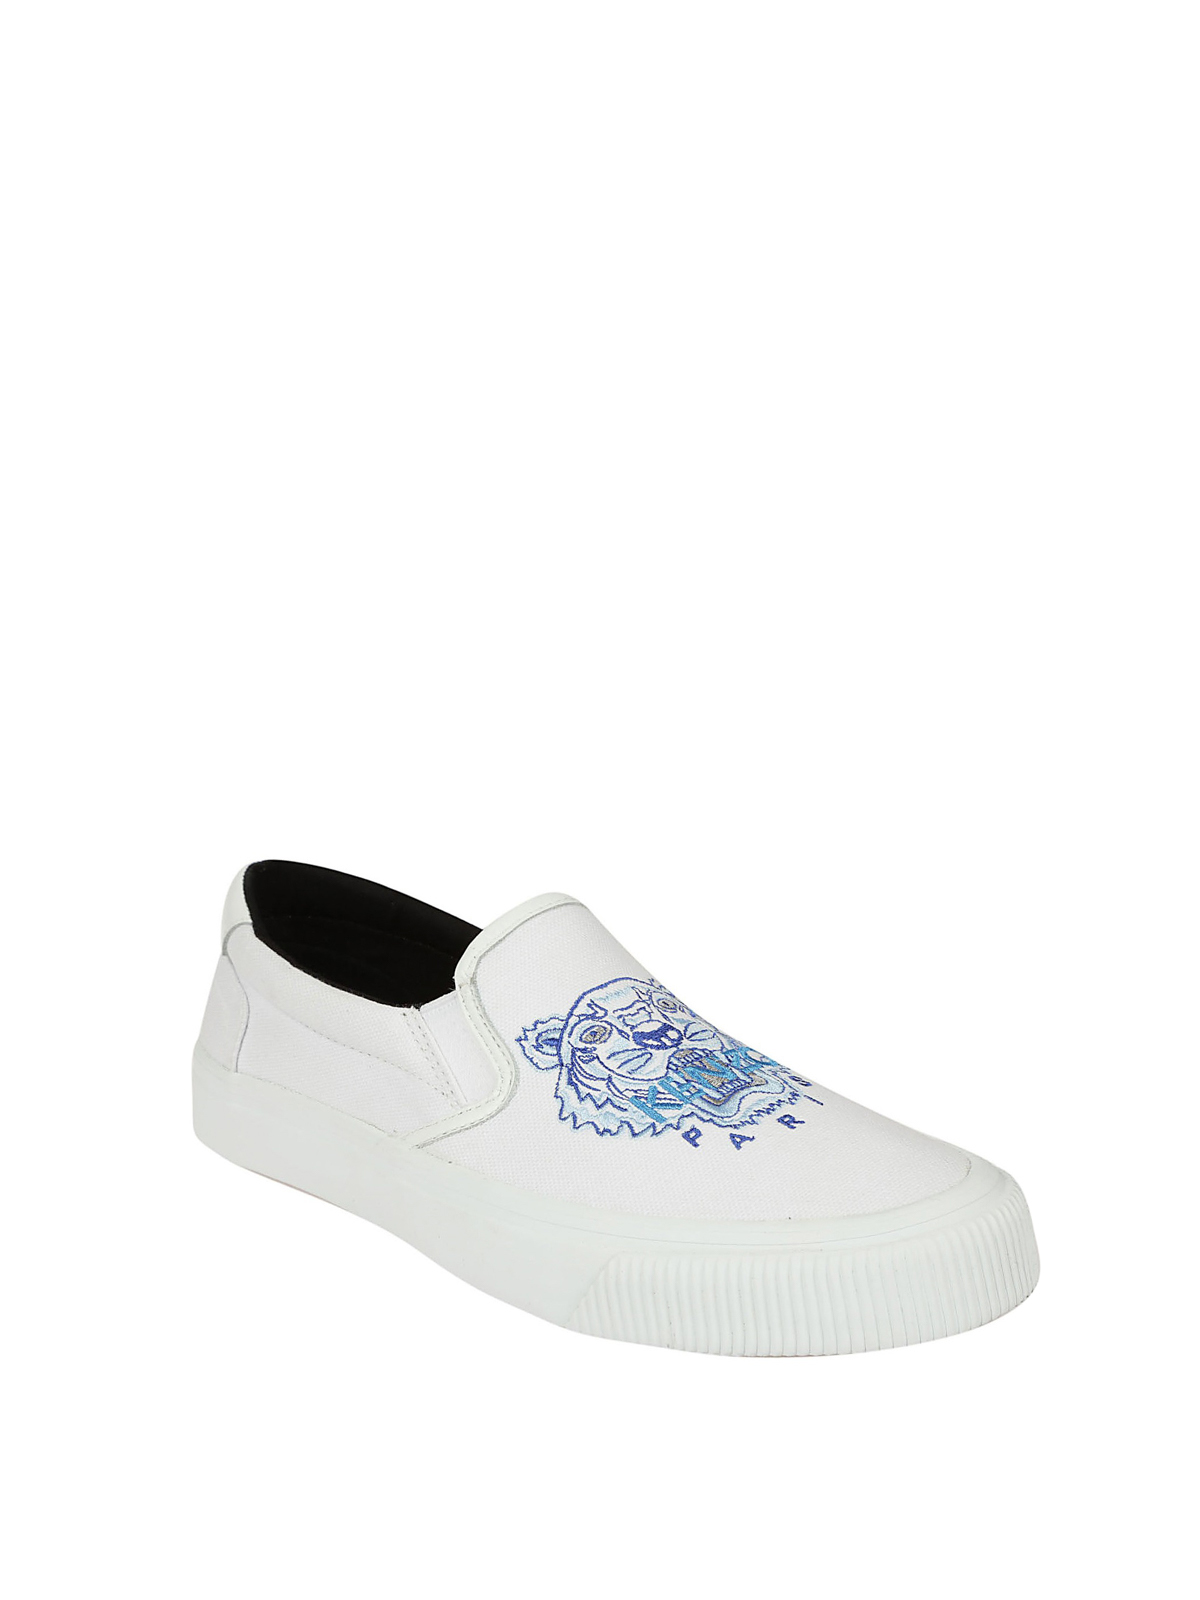 Trainers Kenzo - white canvas slip-on sneakers - F855SN100F7201